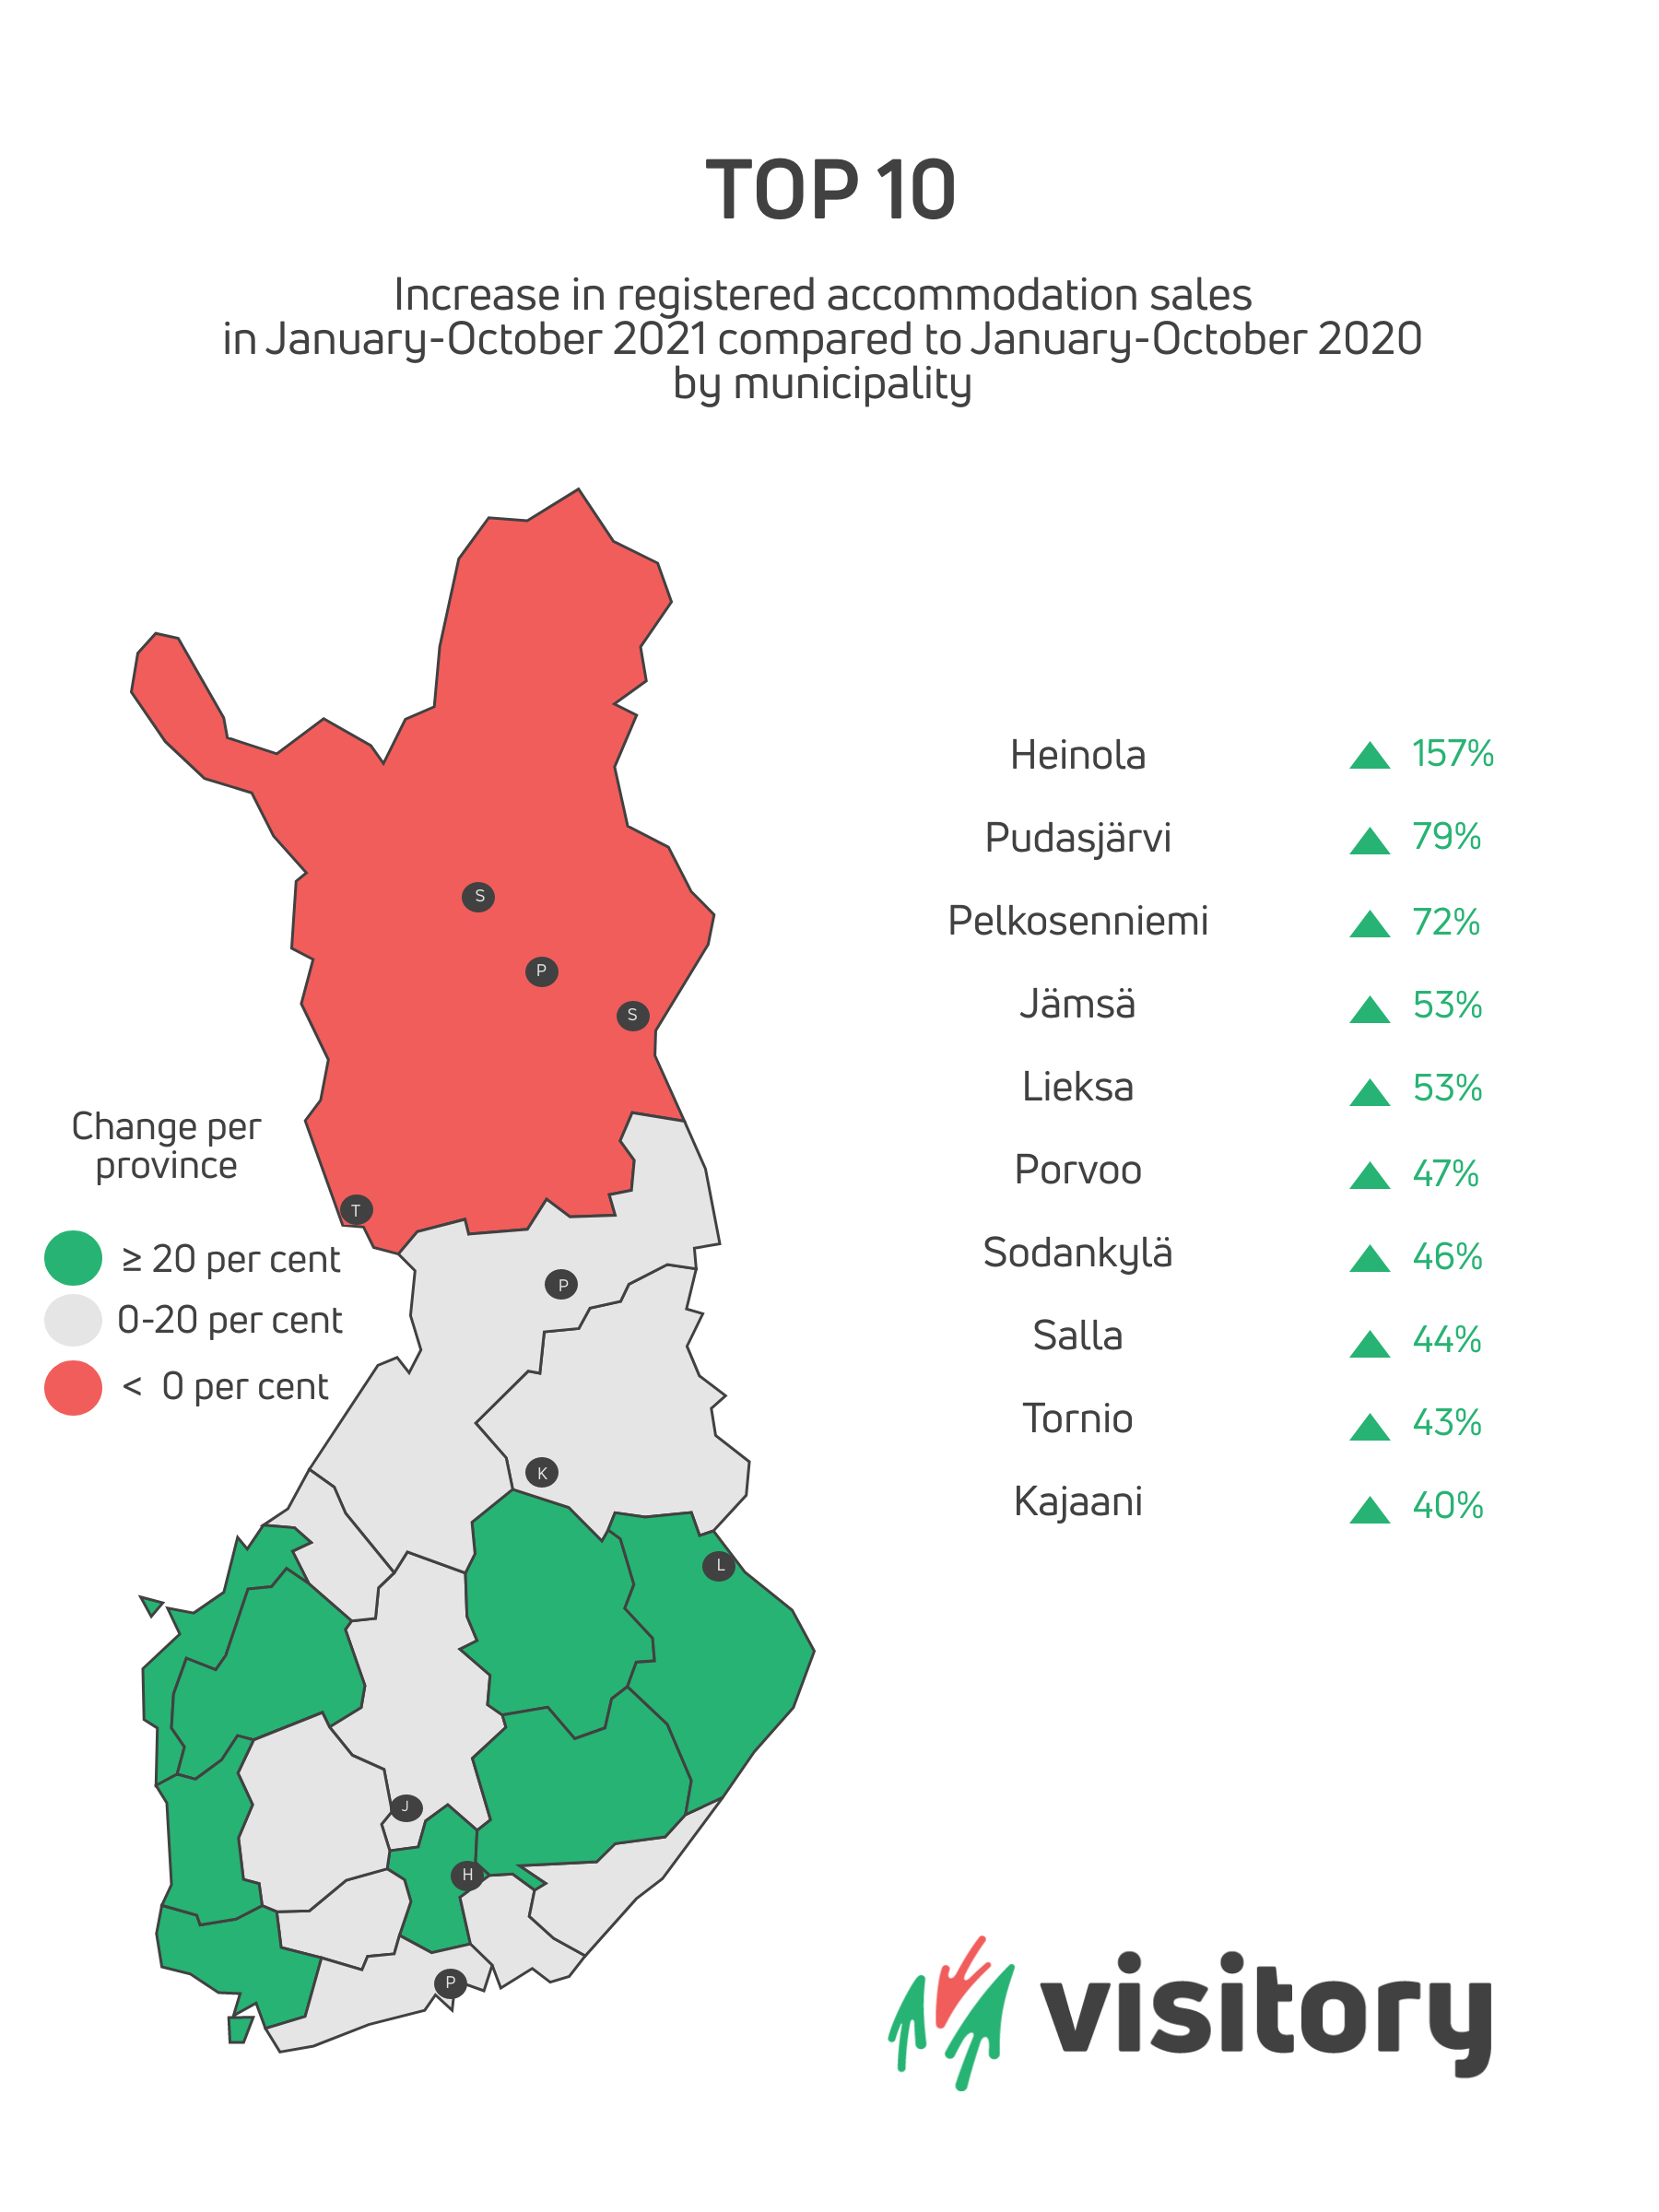 Increase in registered accommodation sales in January-October 2021 compared to January-Octover 2020 by municipality